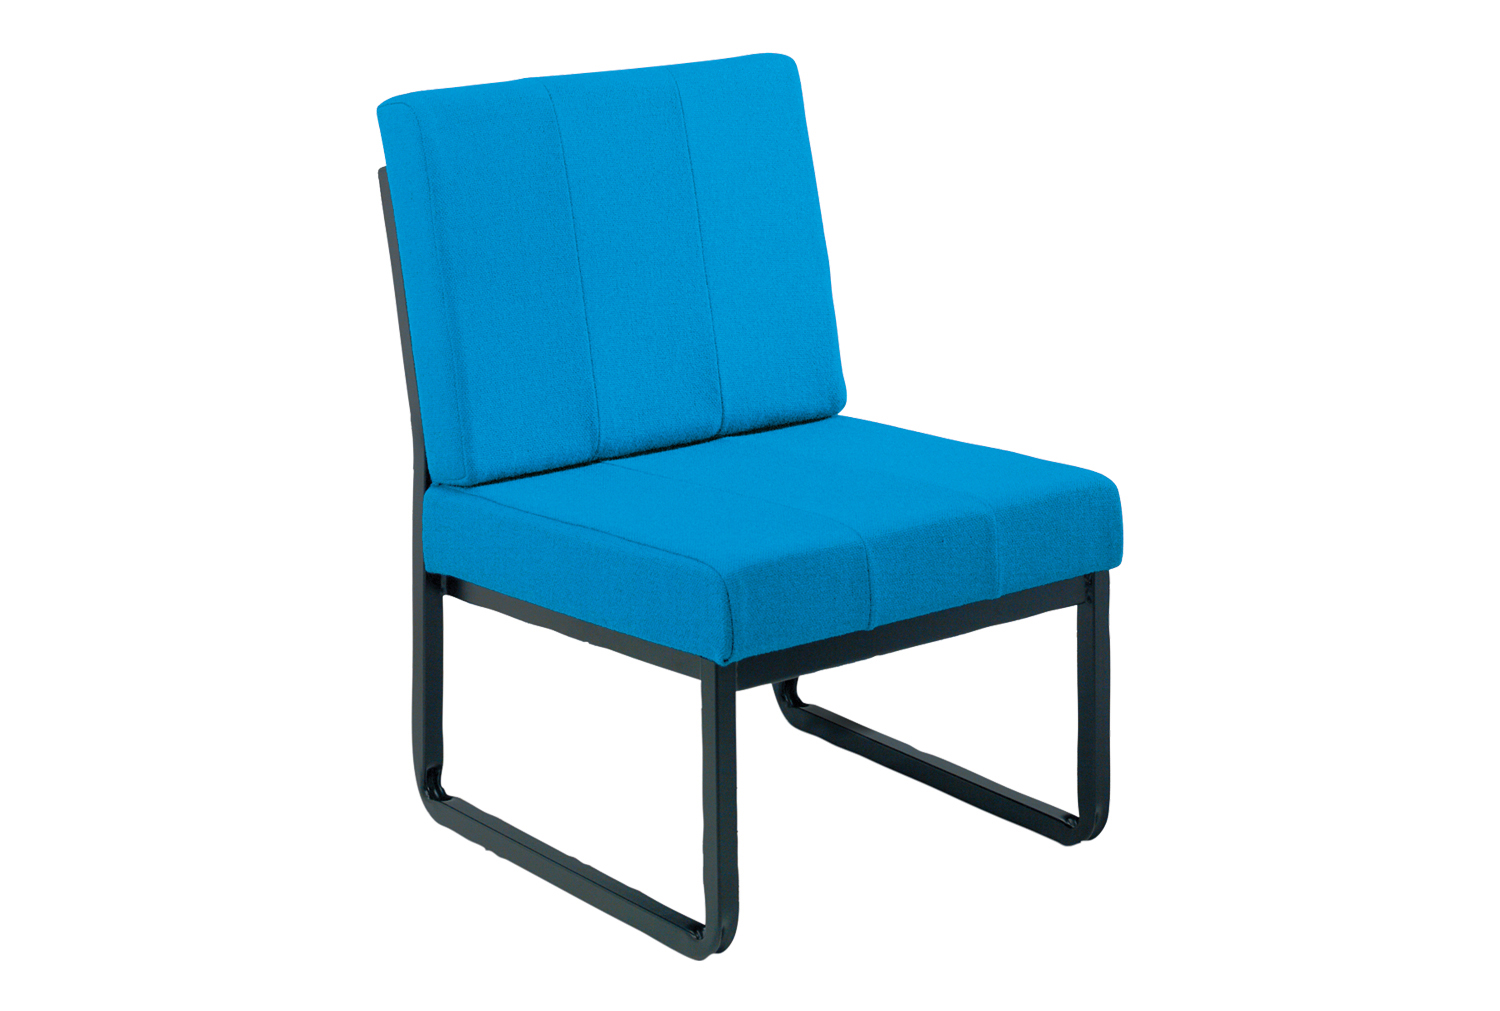 Qty 4 - Amstell Skid Base Chair, Stage